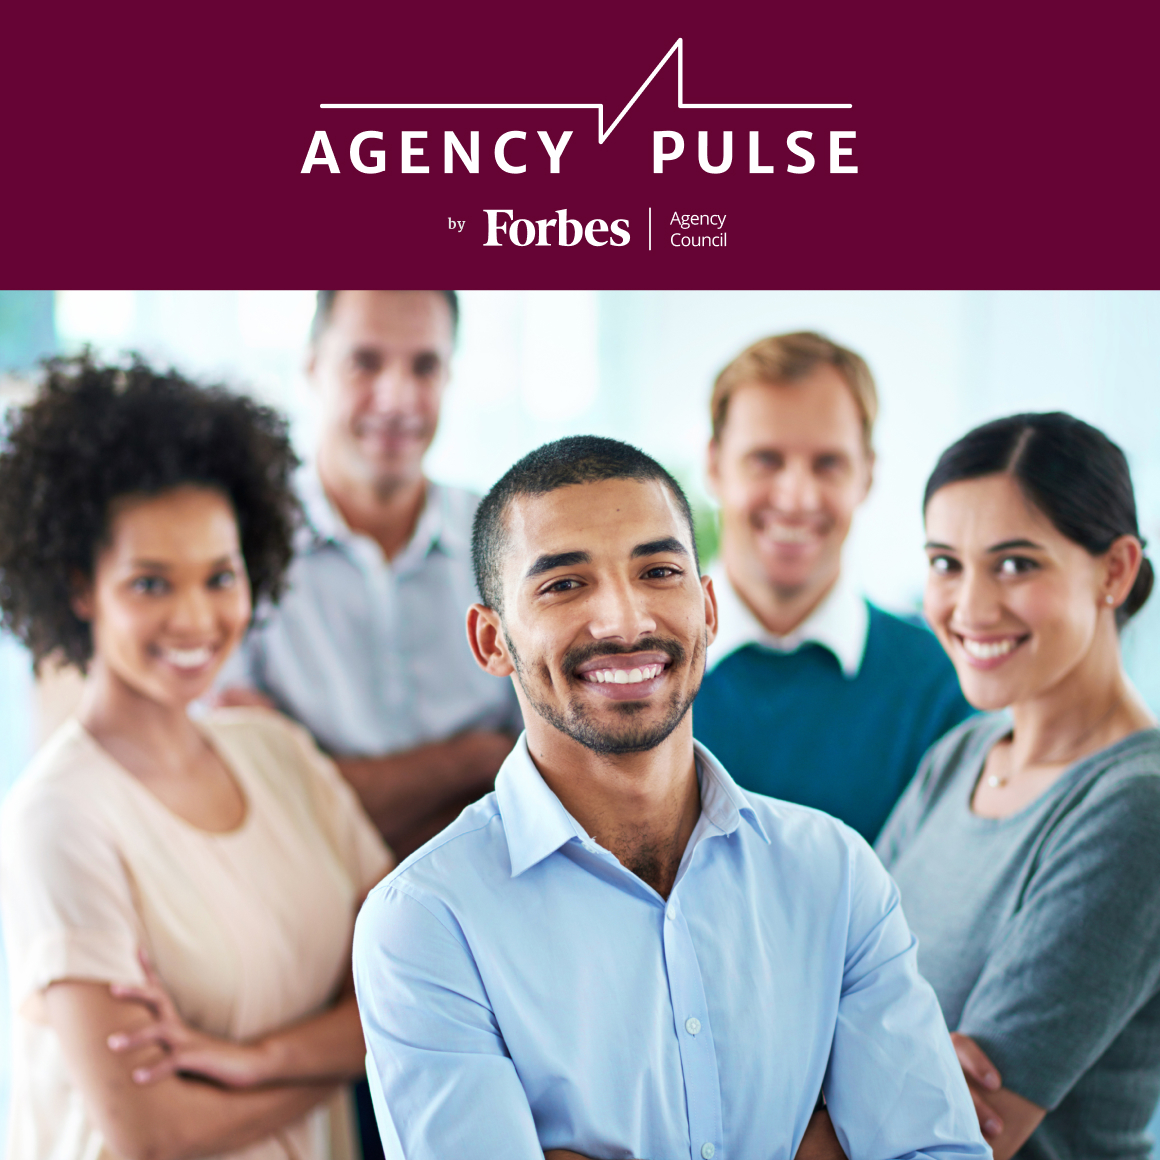 Forbes Agency Pulse